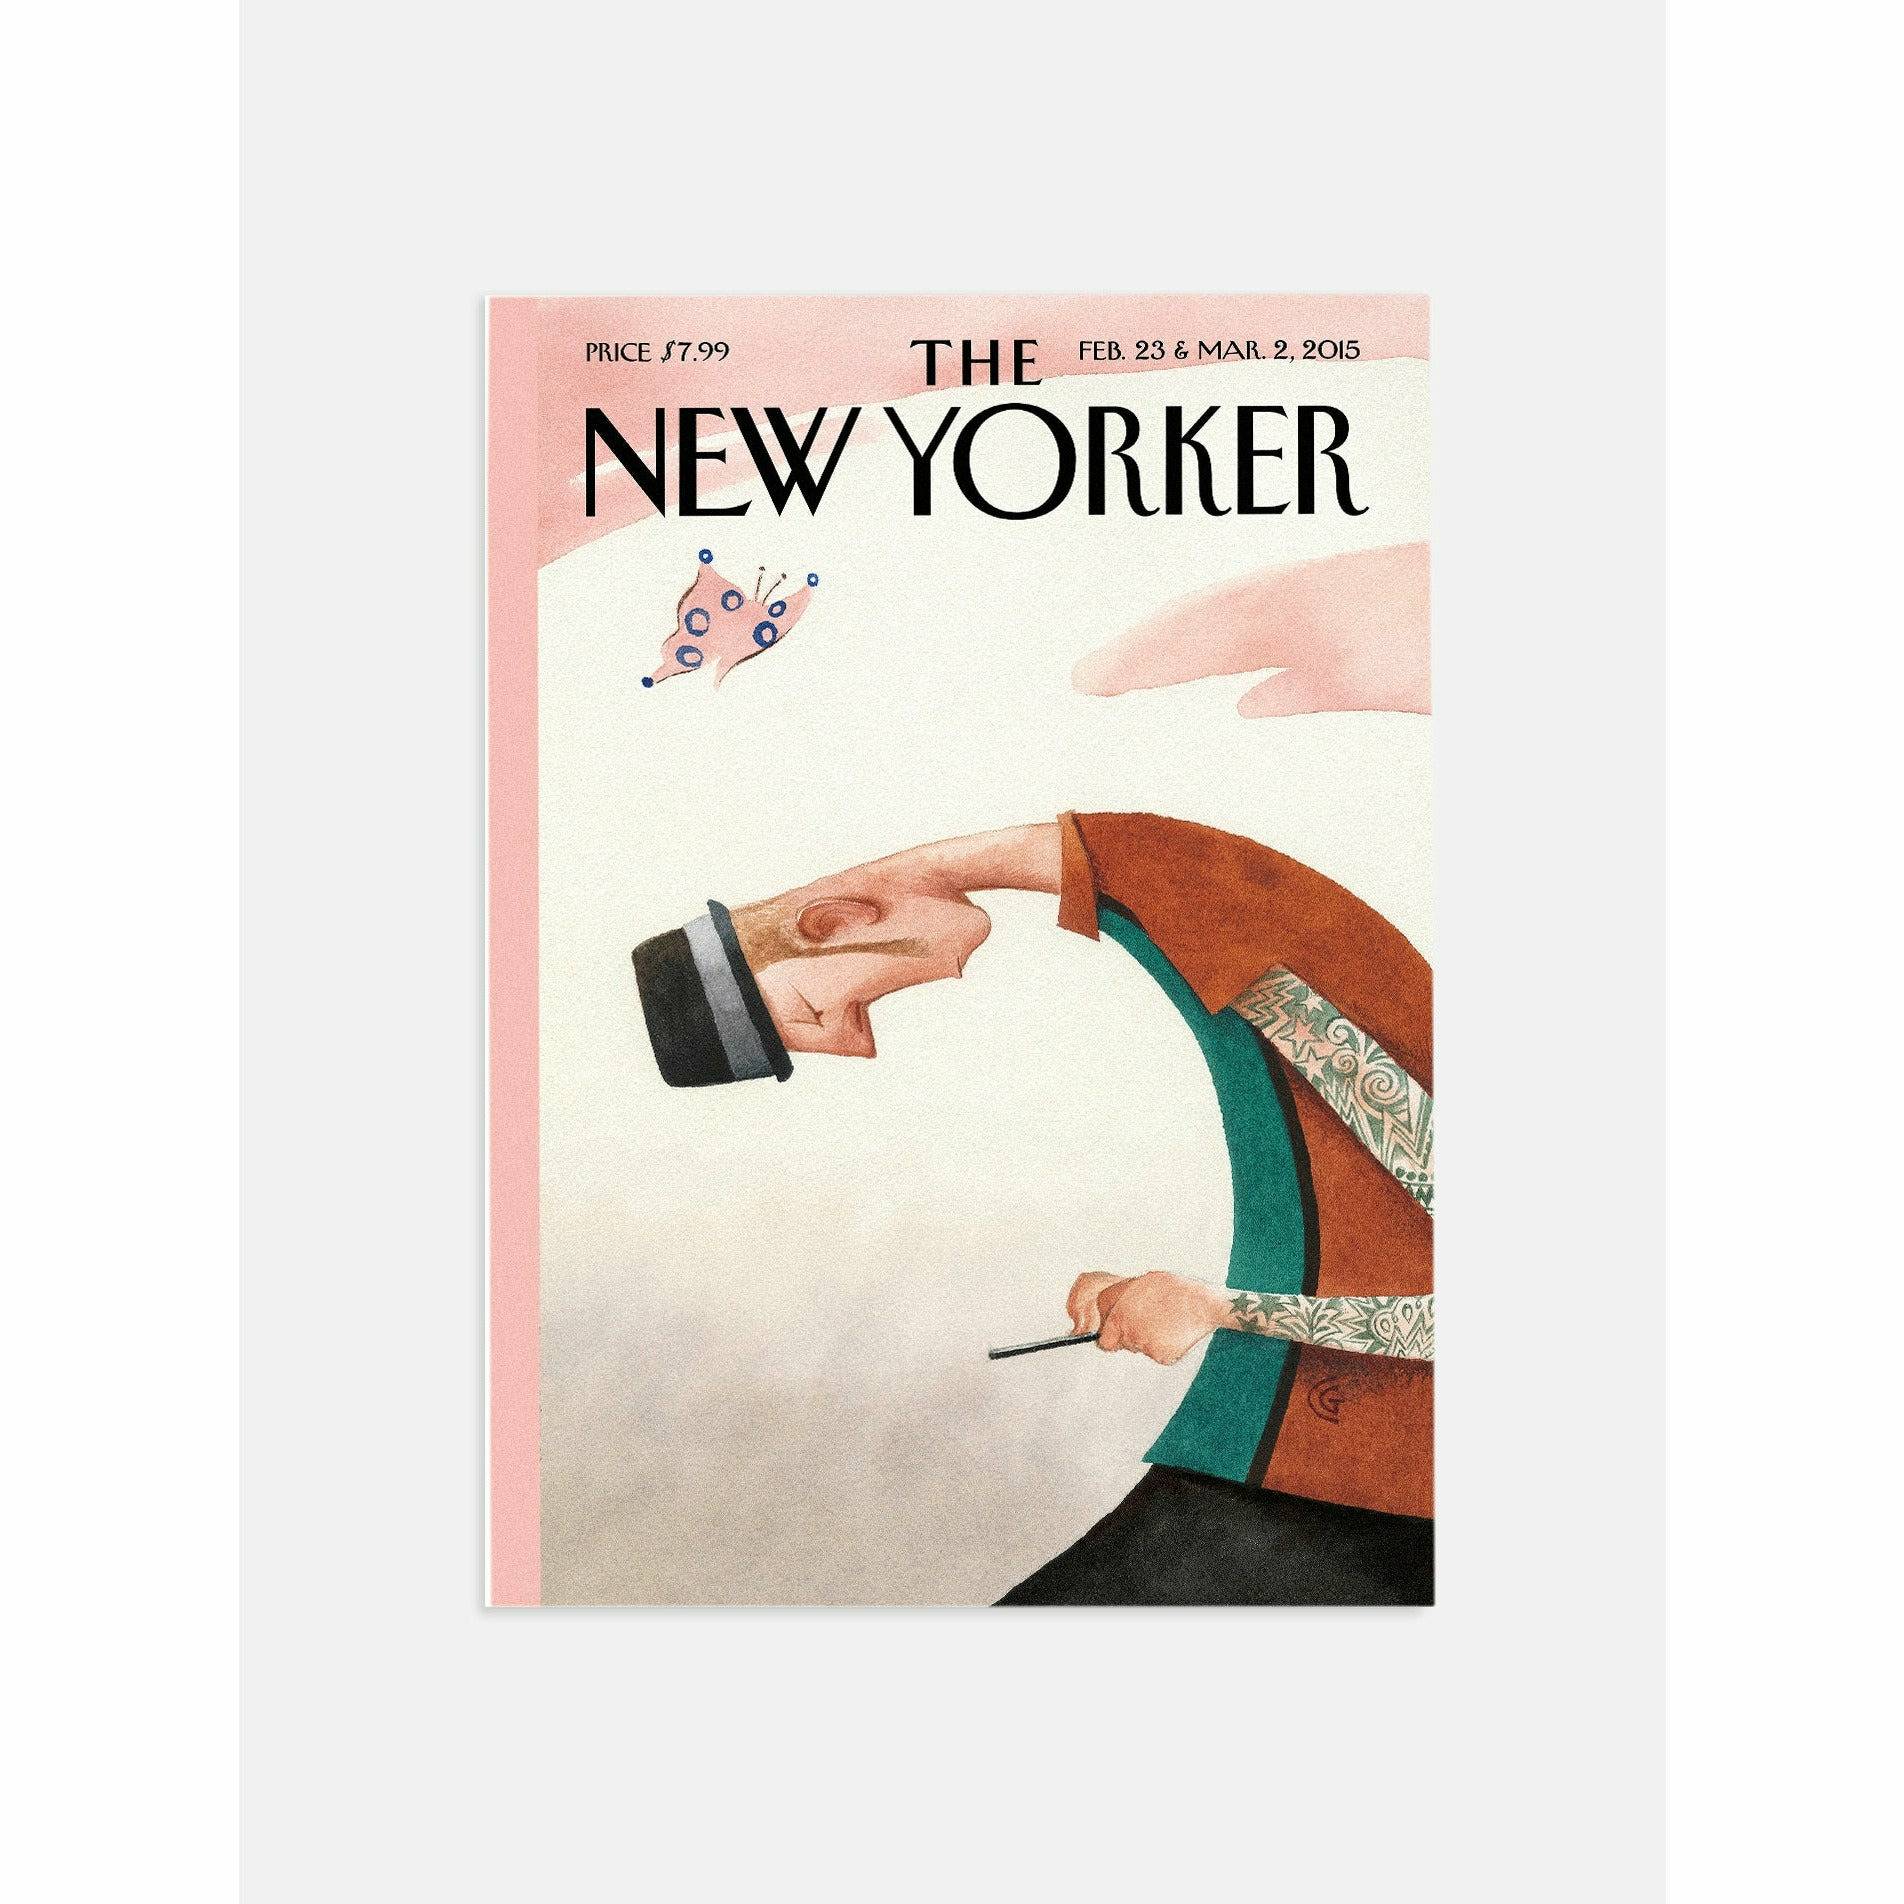 The New Yorker Poster 2015, Cell Phone